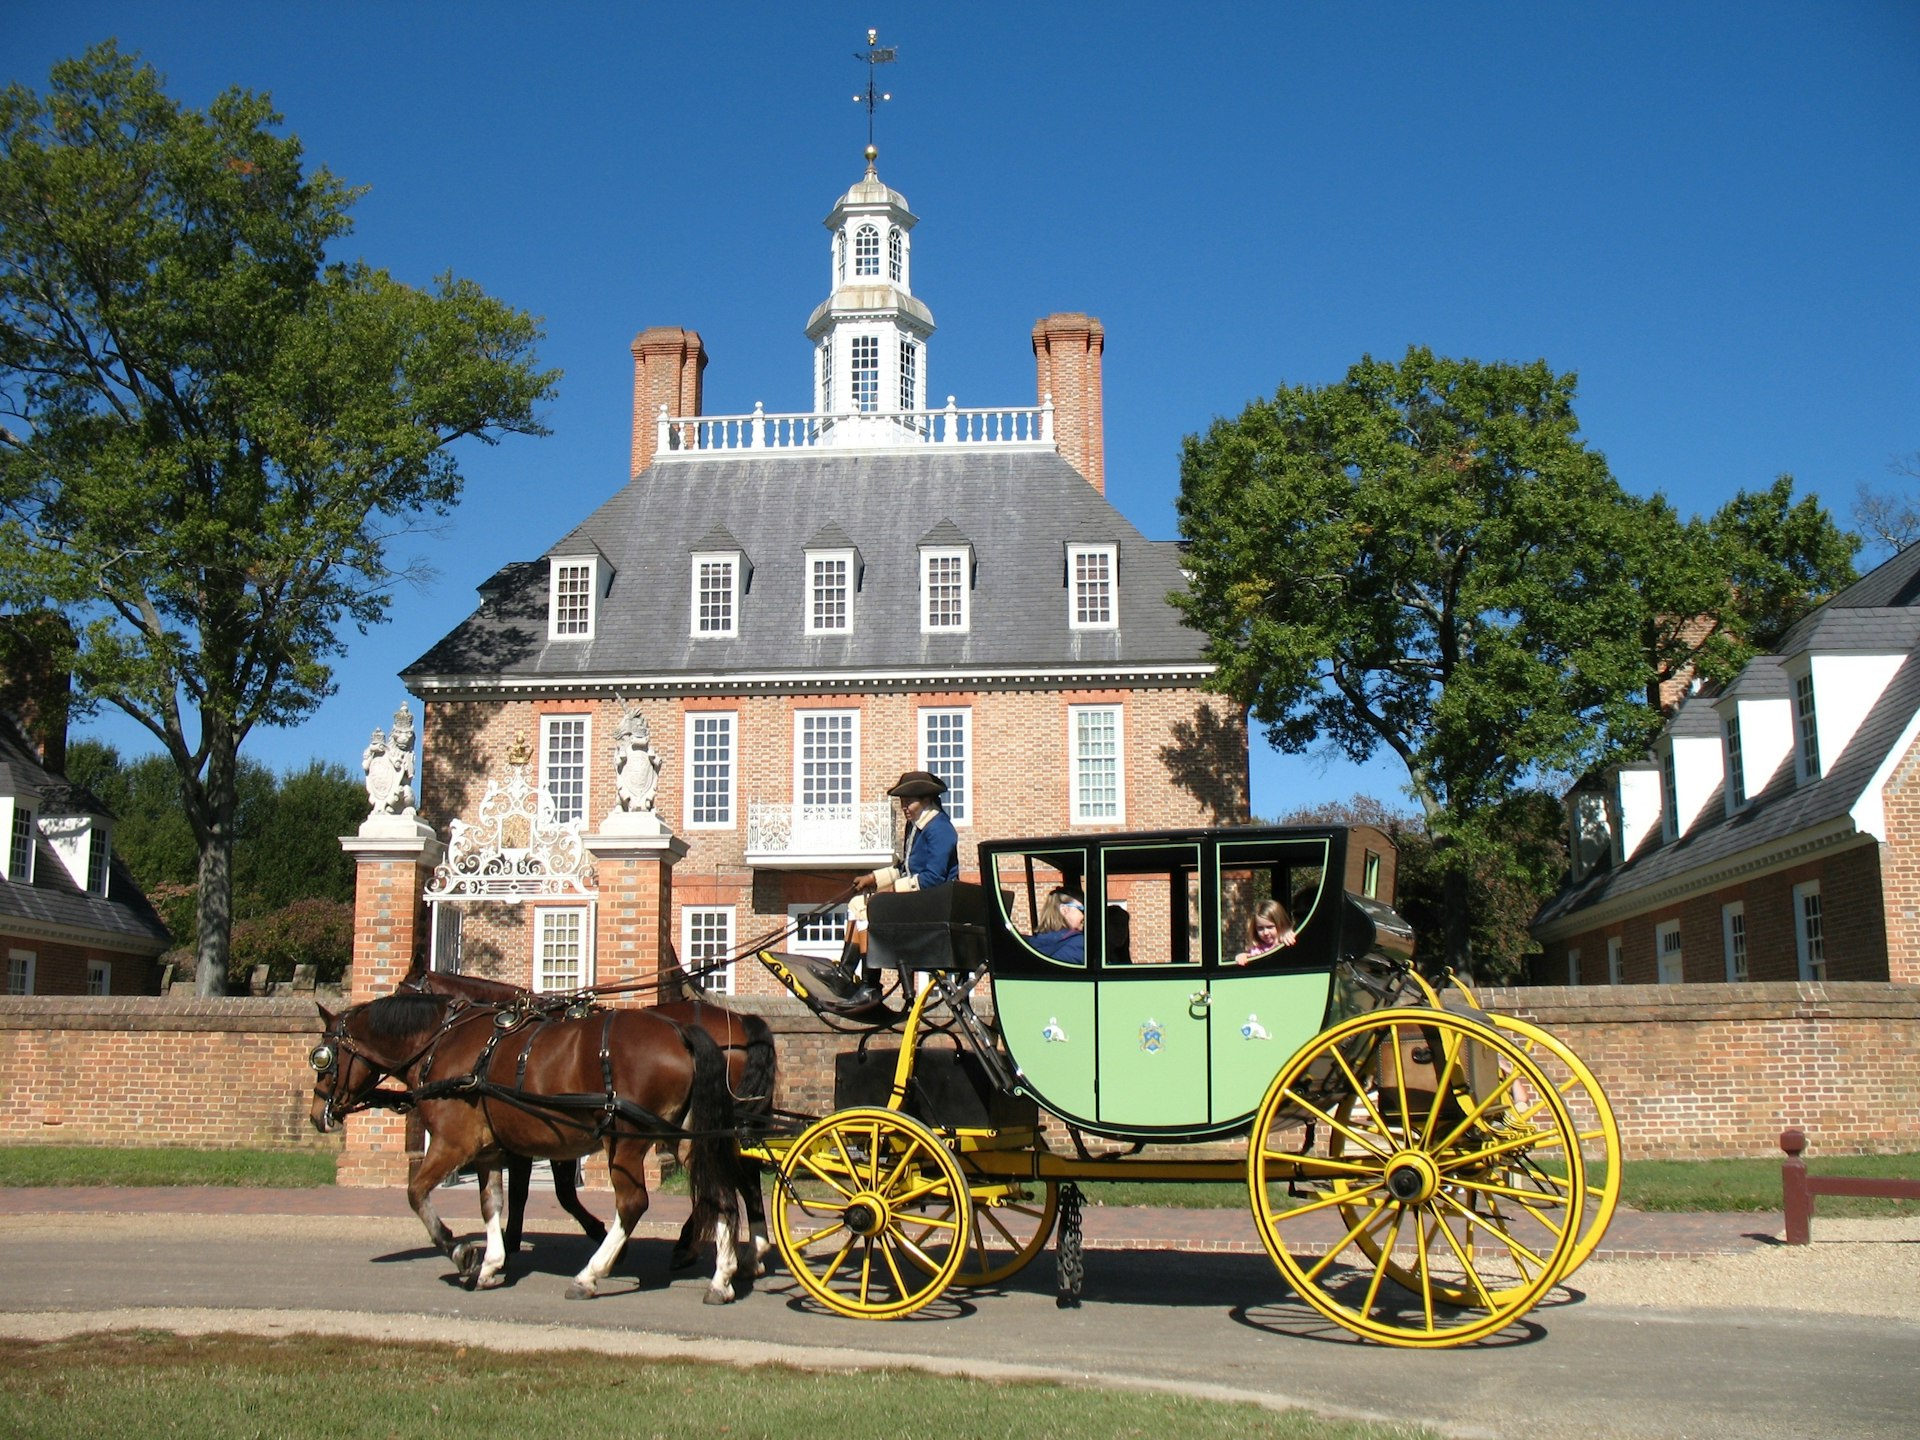 Horse carriage in front of the Governor's Palace in Williamsburg, Virginia